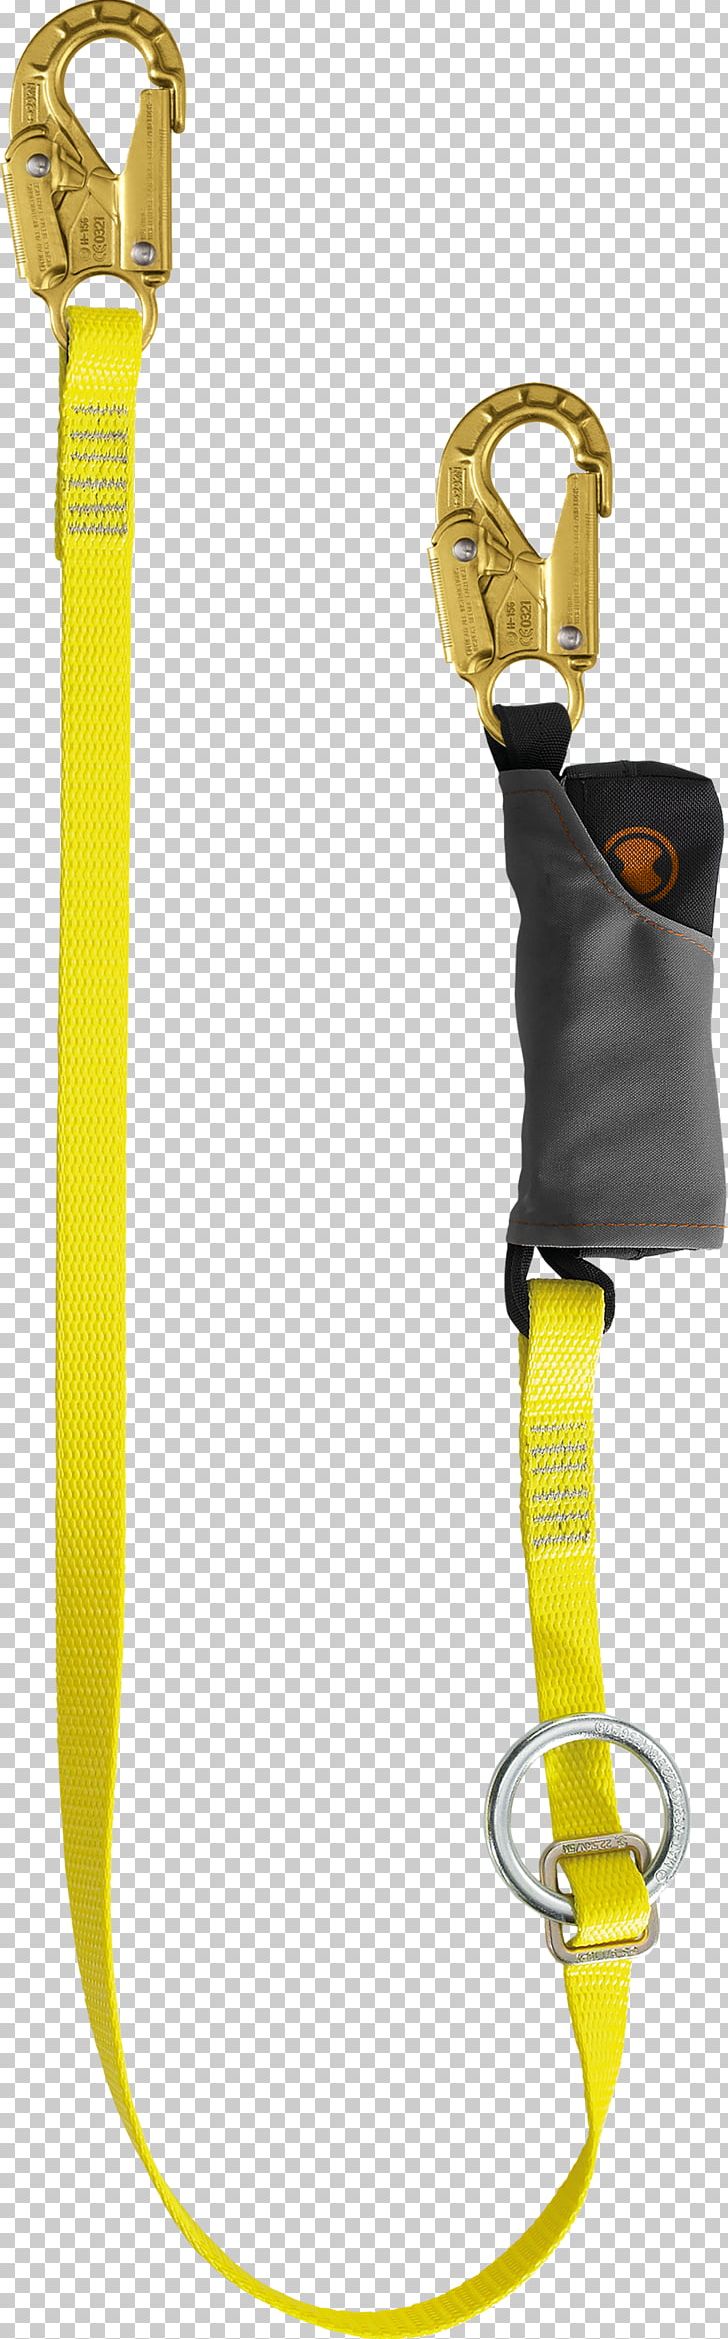 Rope Rock-climbing Equipment Climbing Harnesses Harnais Prusik PNG, Clipart, Absorb, Anchor, Arborist, Belaying, Belay Rappel Devices Free PNG Download